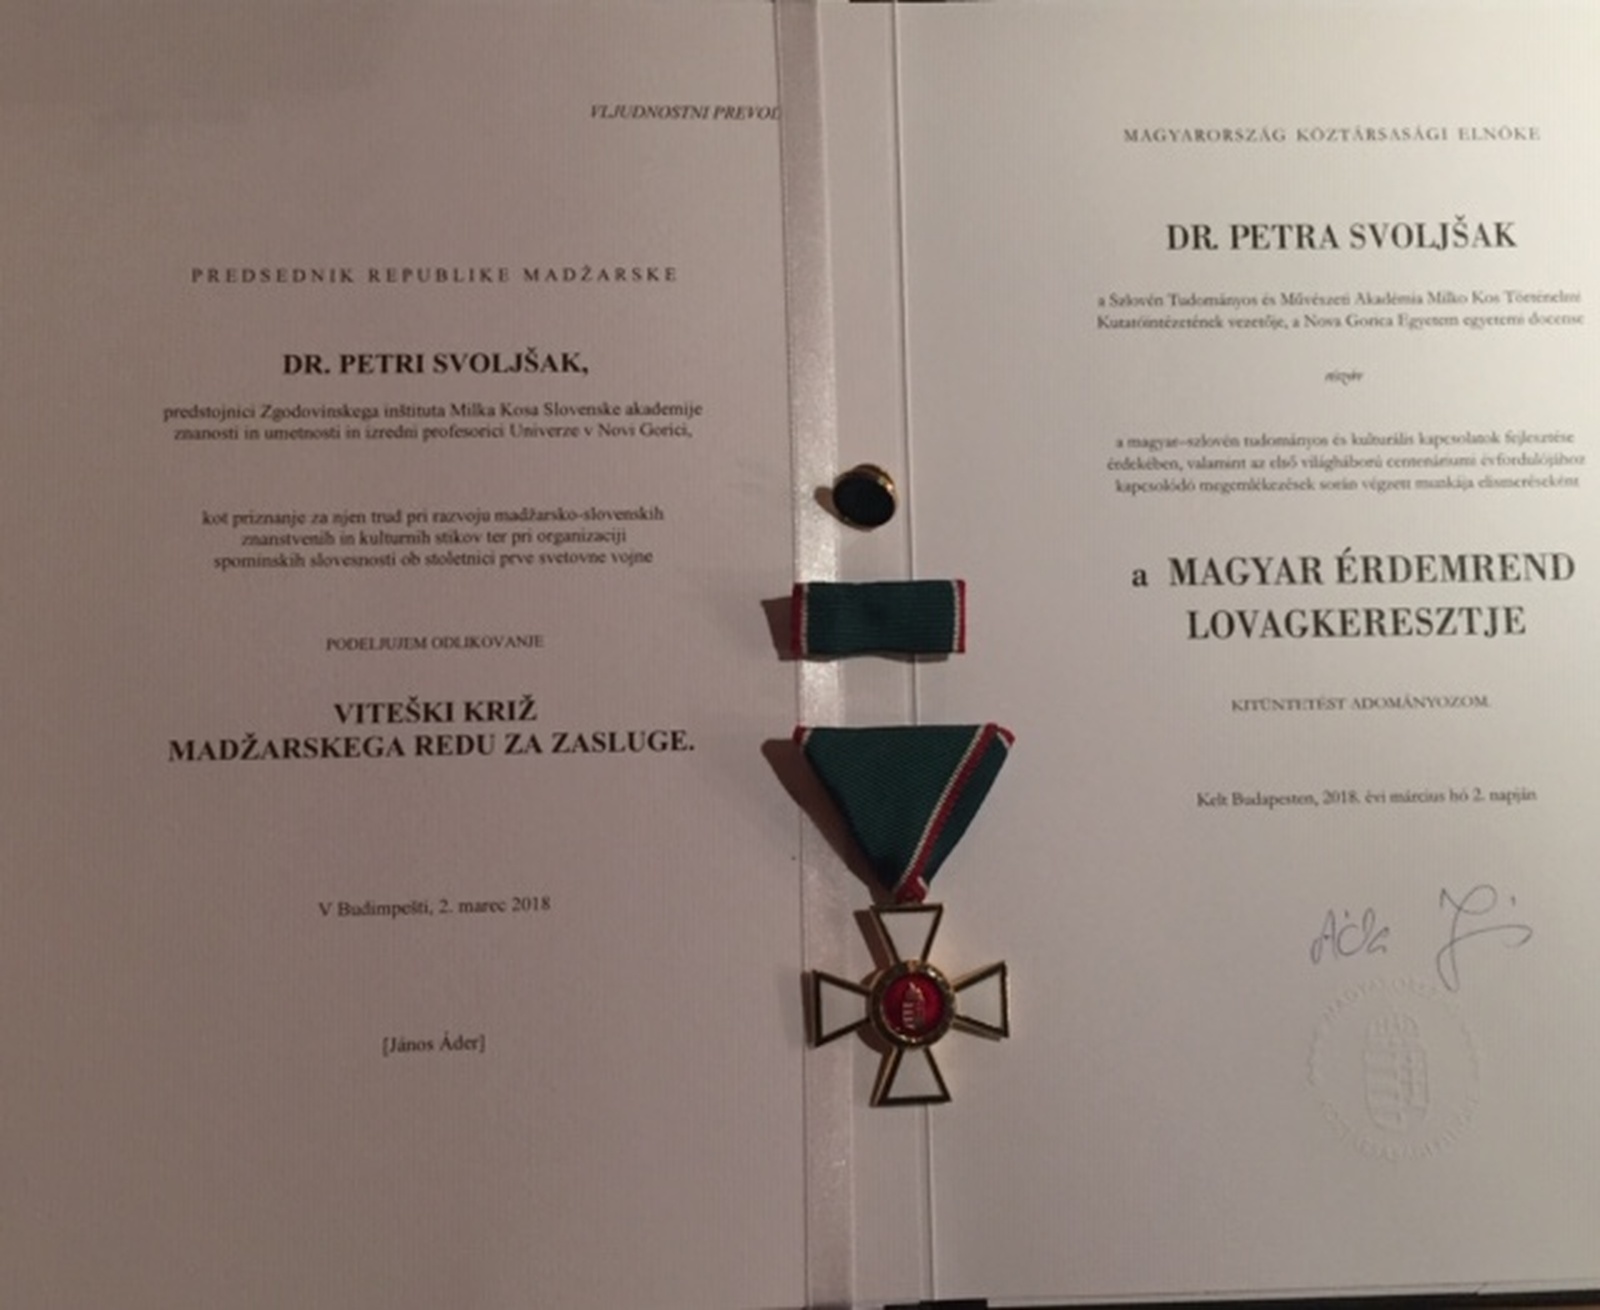 Prof. Dr. Petra Svoljšak received the Grand Cross of the Hungarian Order of Merit